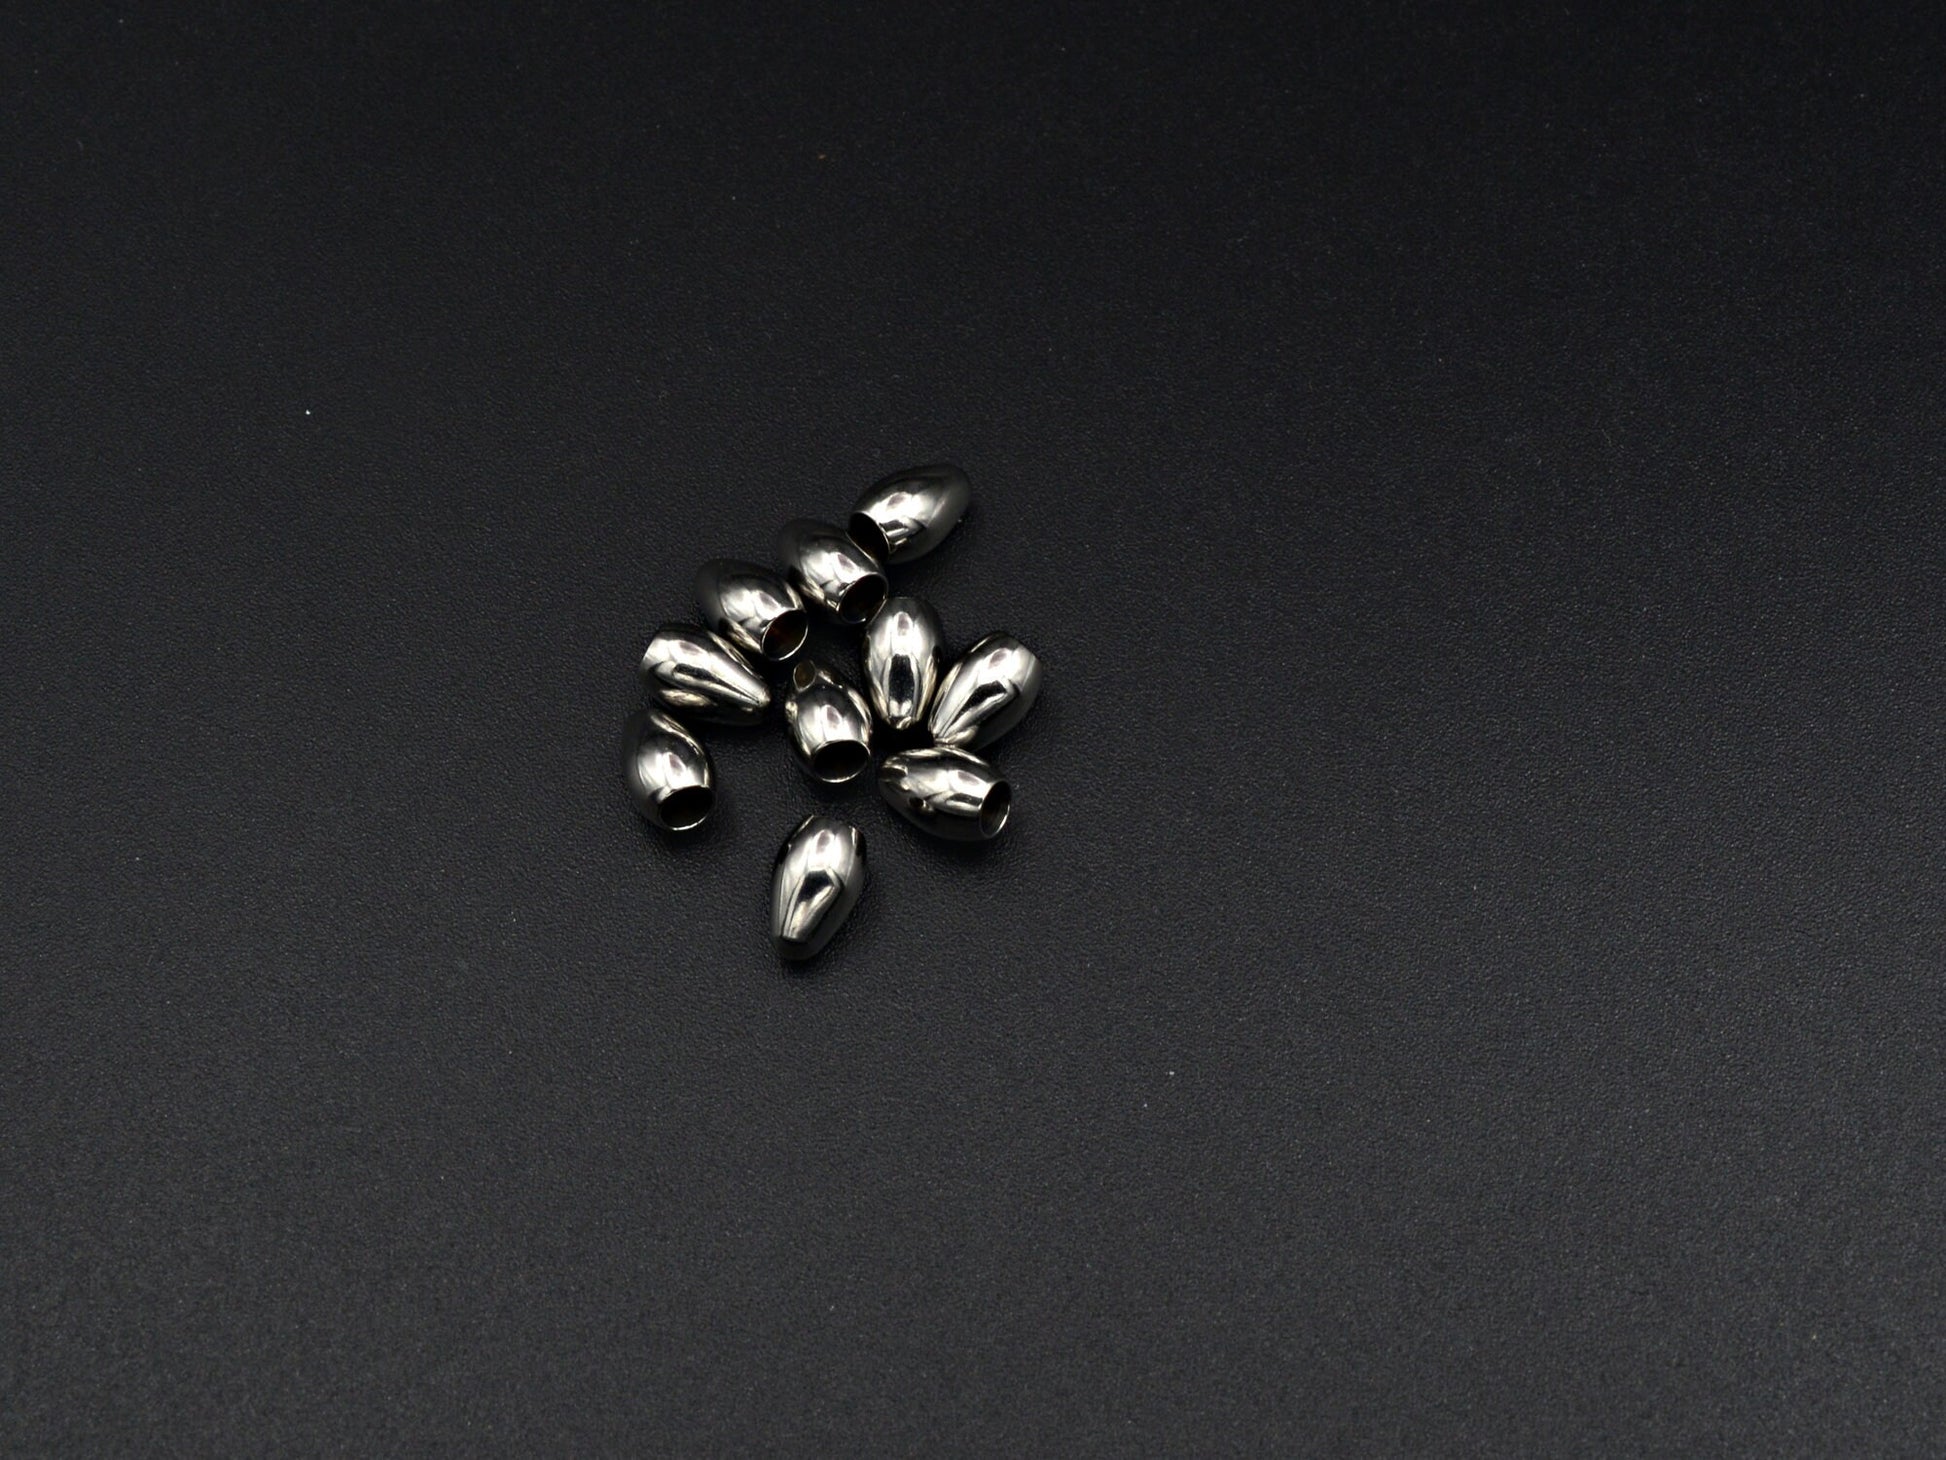 20 PCs Stainless Steel Tear drop Trim End Plain Beads Glue on Size 8x5mm Jewelry Findings Supply For Jewelry Making and Wholesale